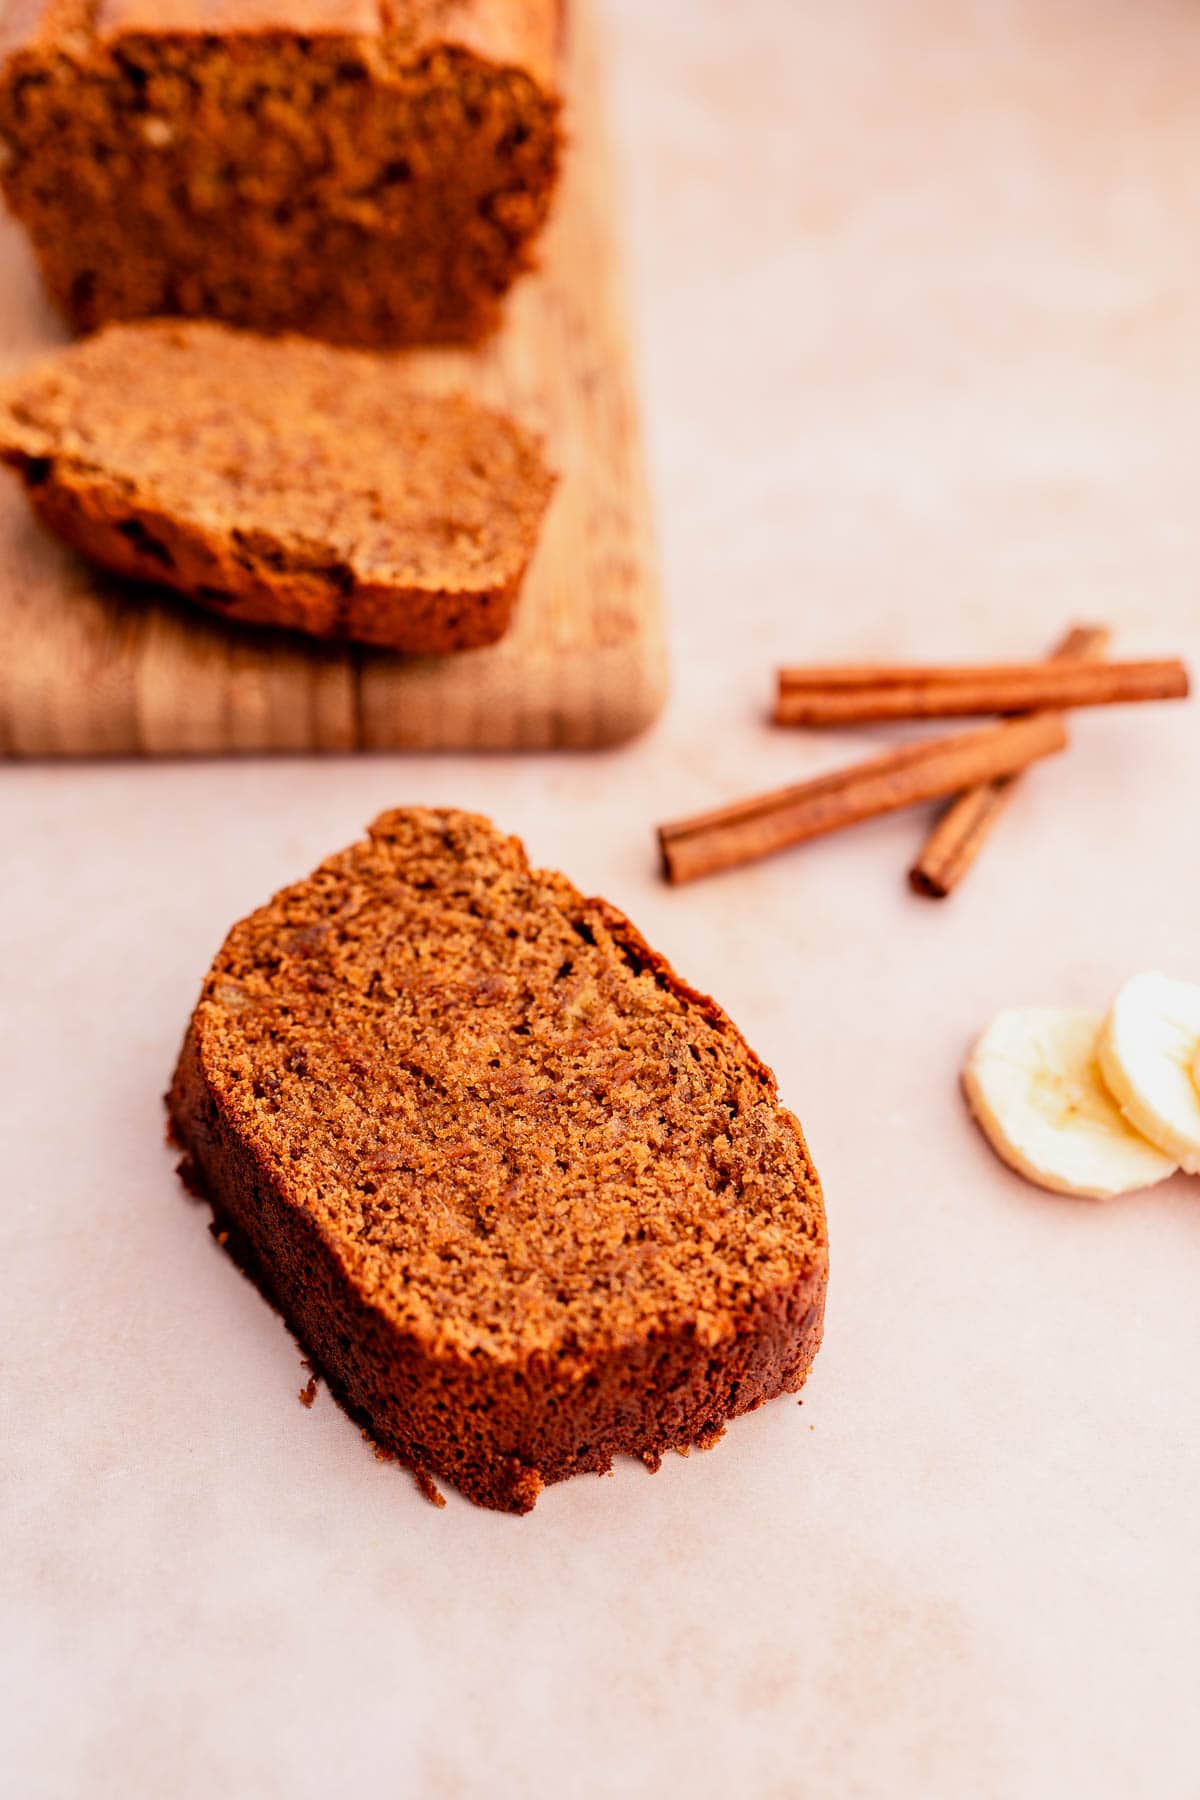 A slice of banana bread made with oat flour on a cutting board.